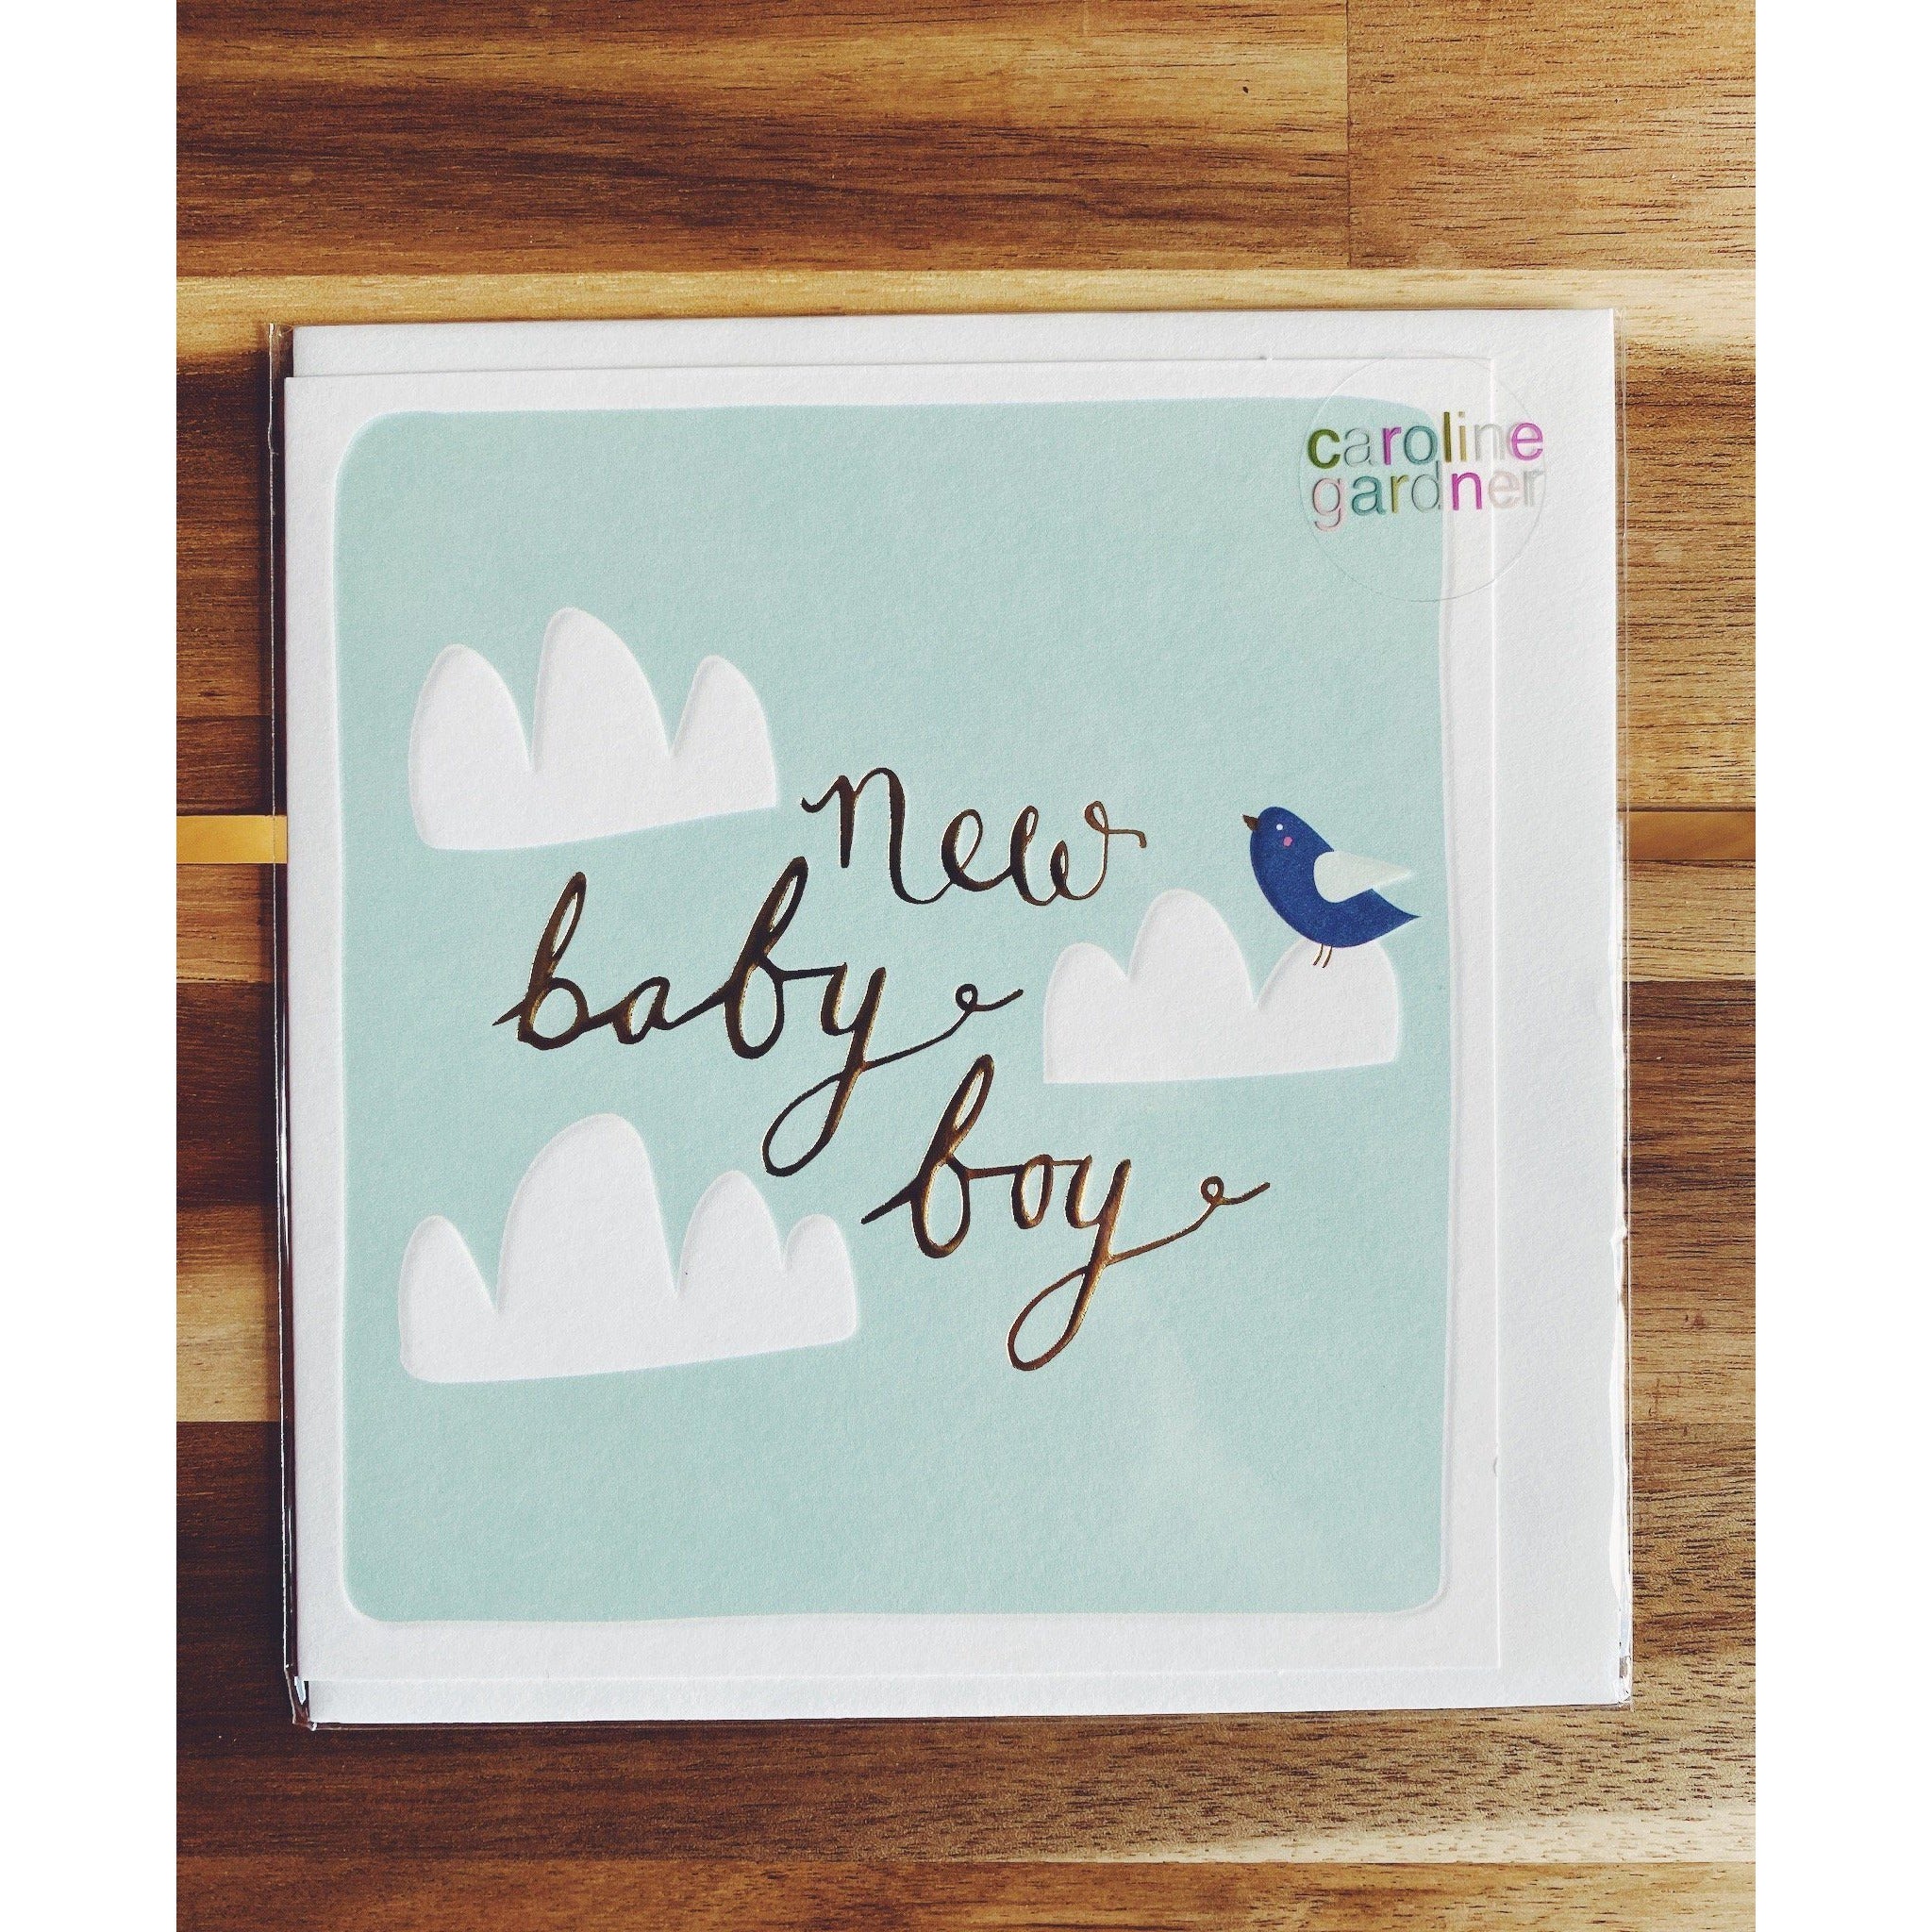 " A New Baby Boy " Gift Card - Kate's Kitchen